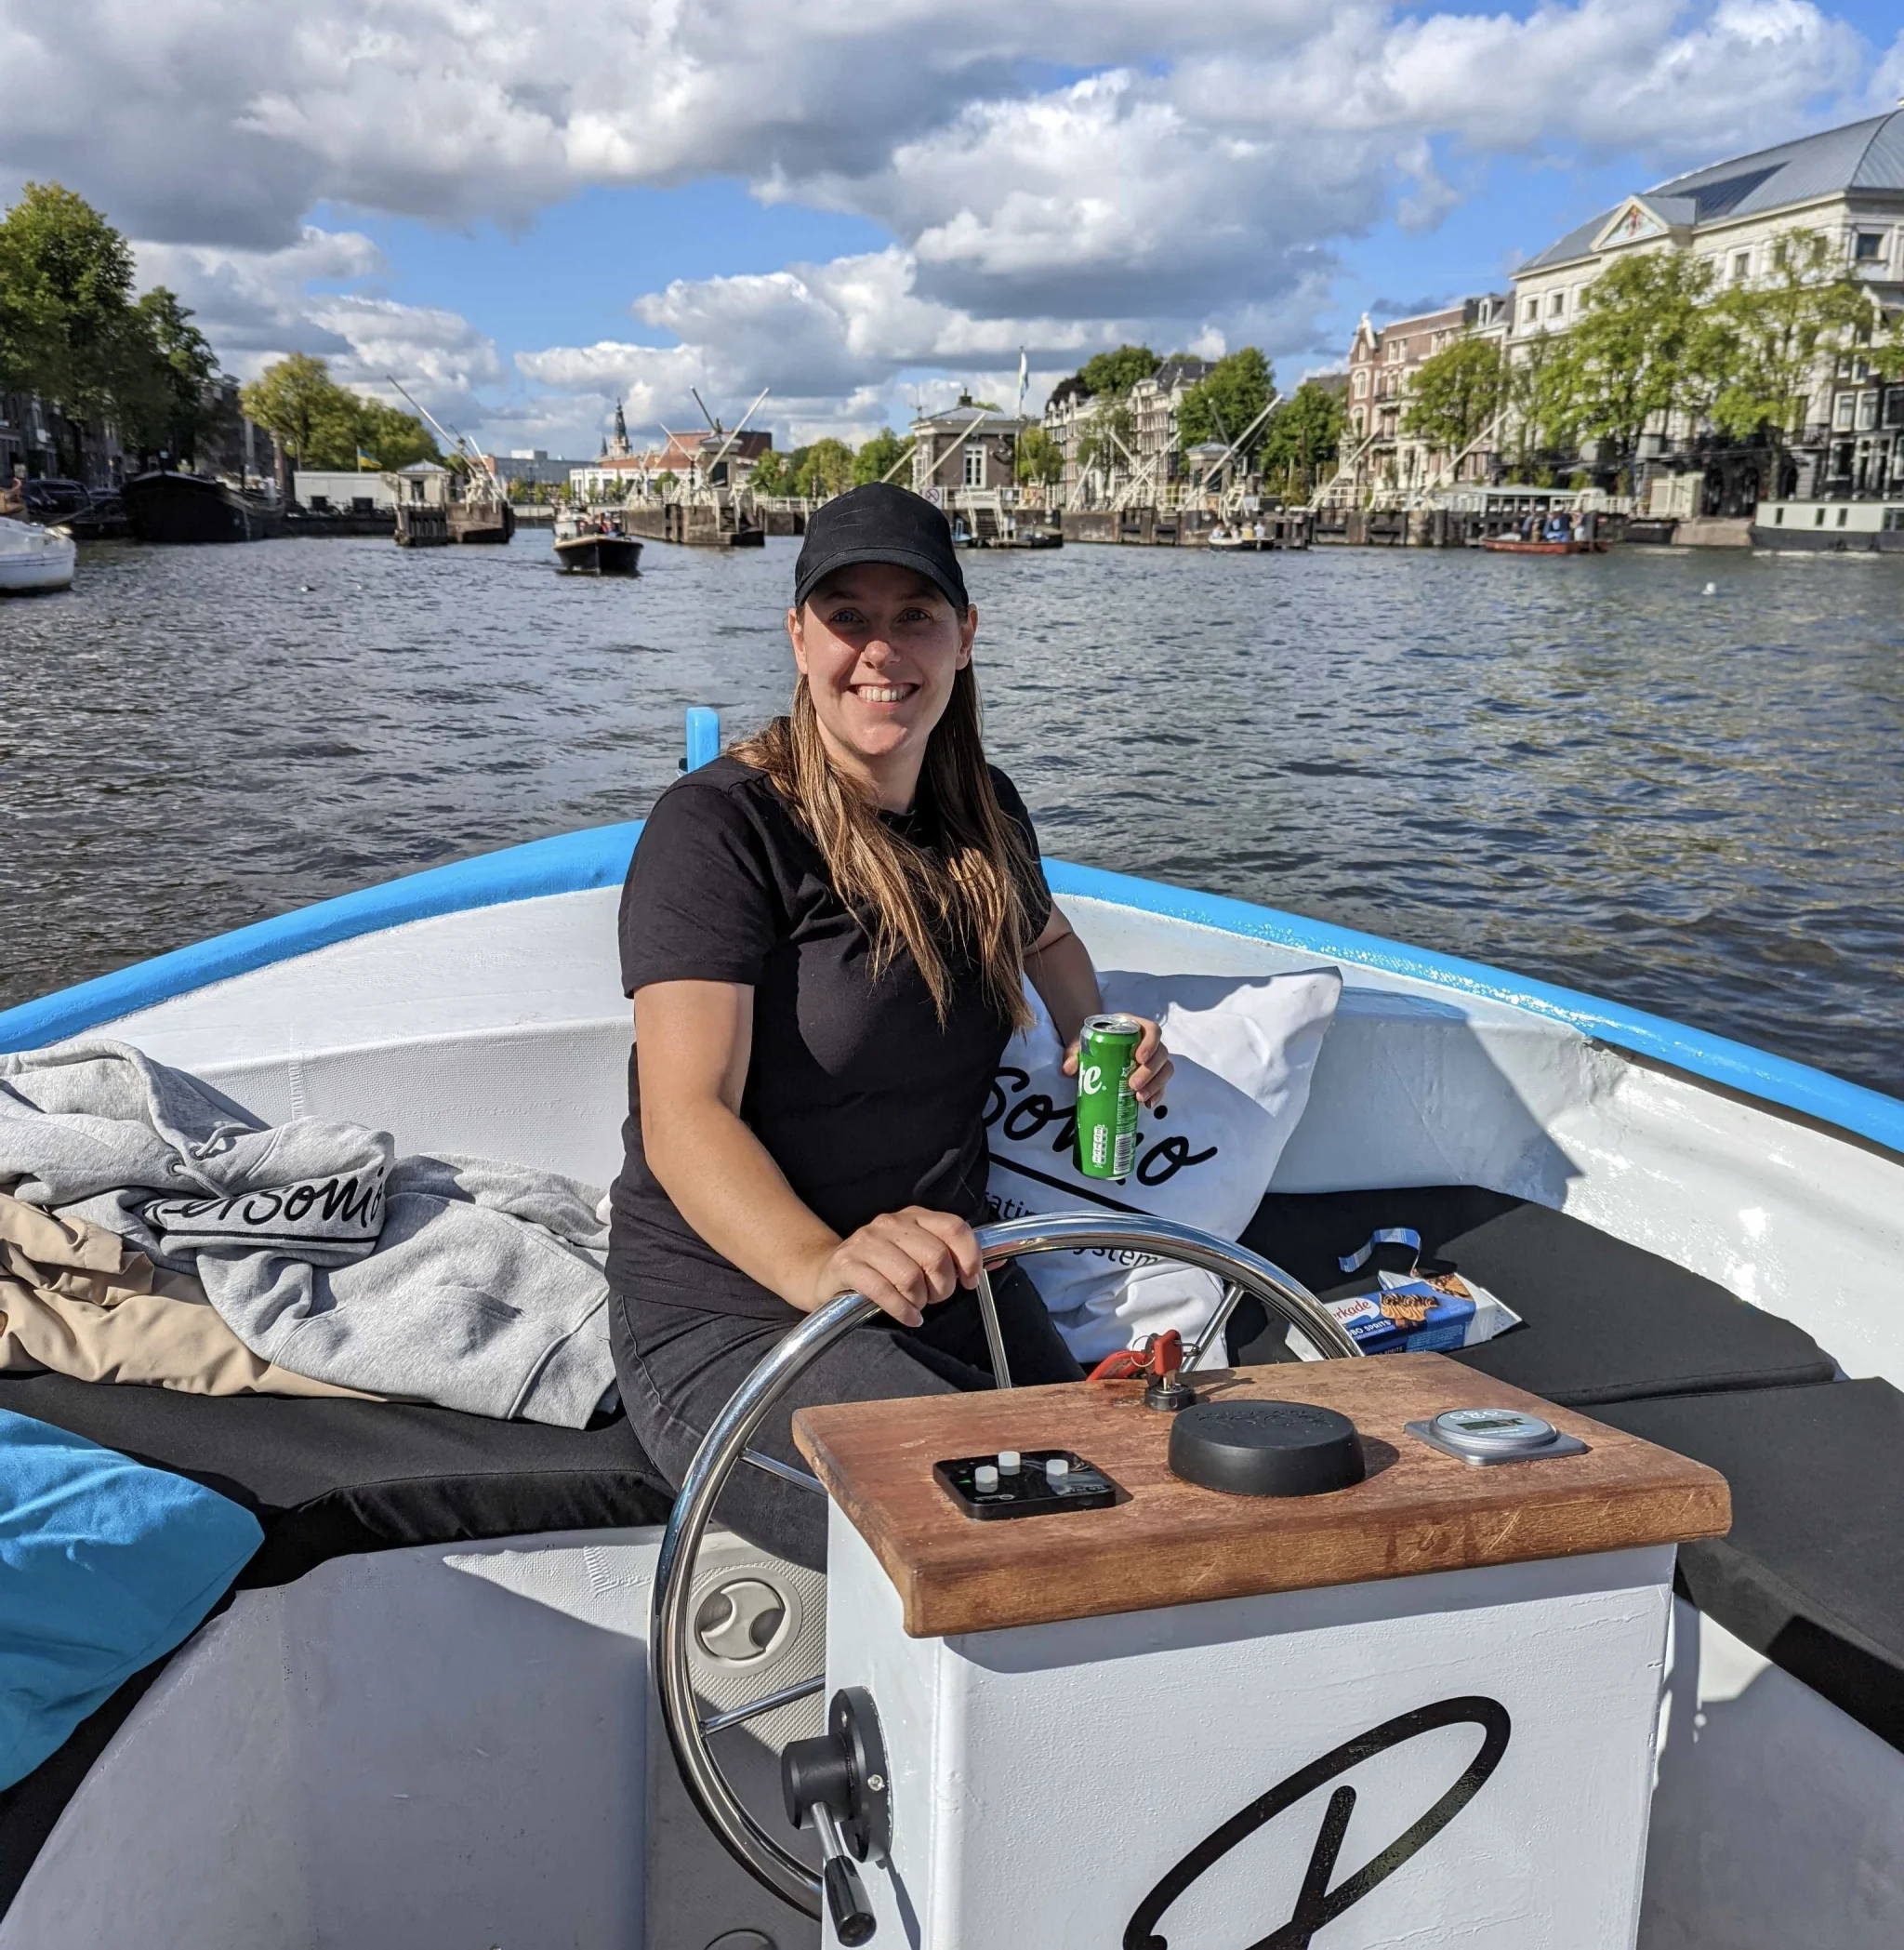 Anita Bax driving Personio boat on Amsterdam Canal